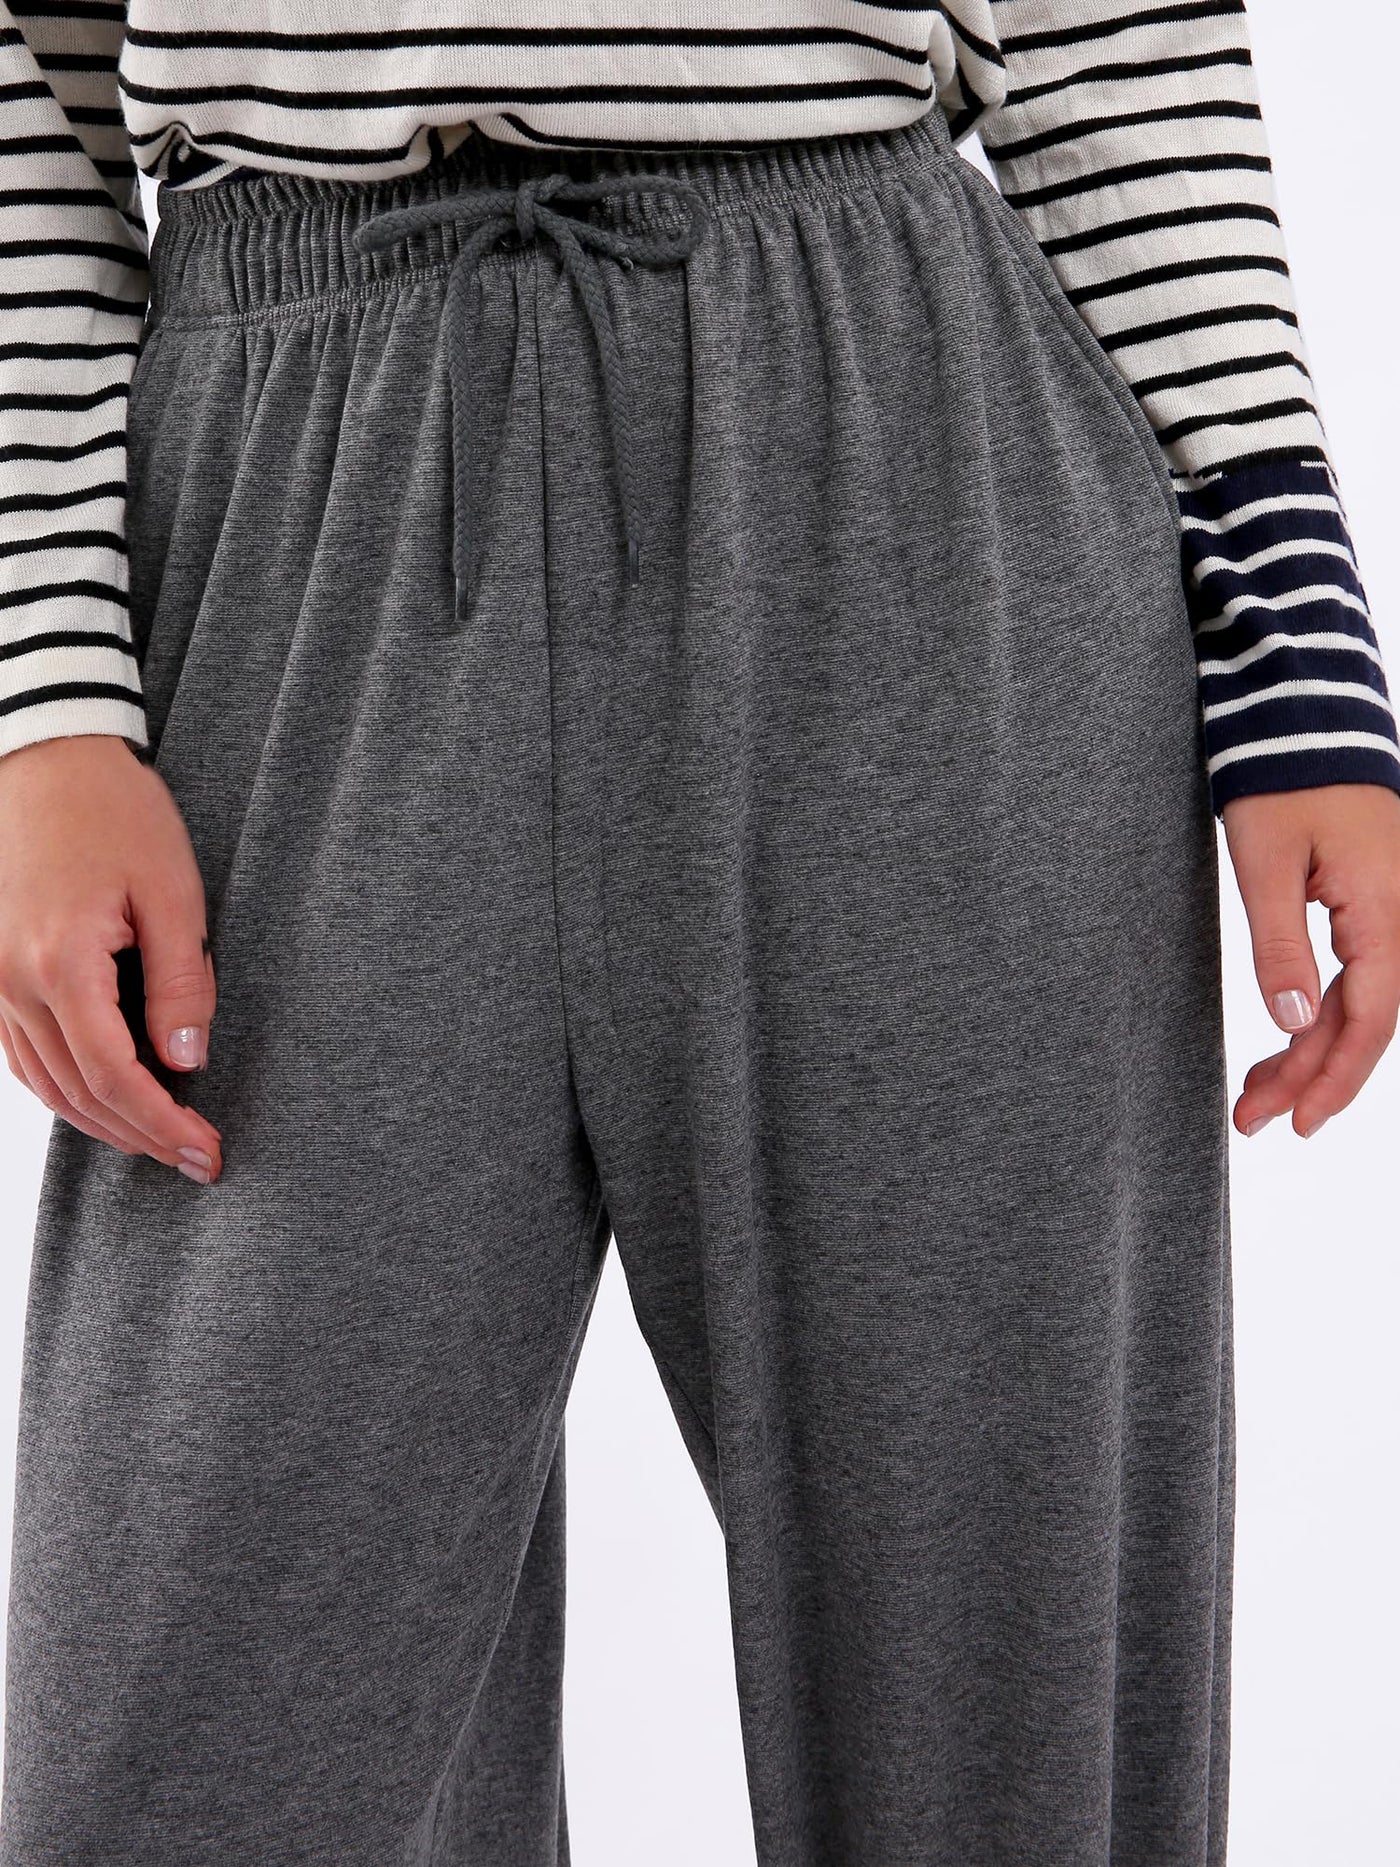 NTG Fad High Waisted Casual Wide Leg Sweatpants Joggers pants with Pockets